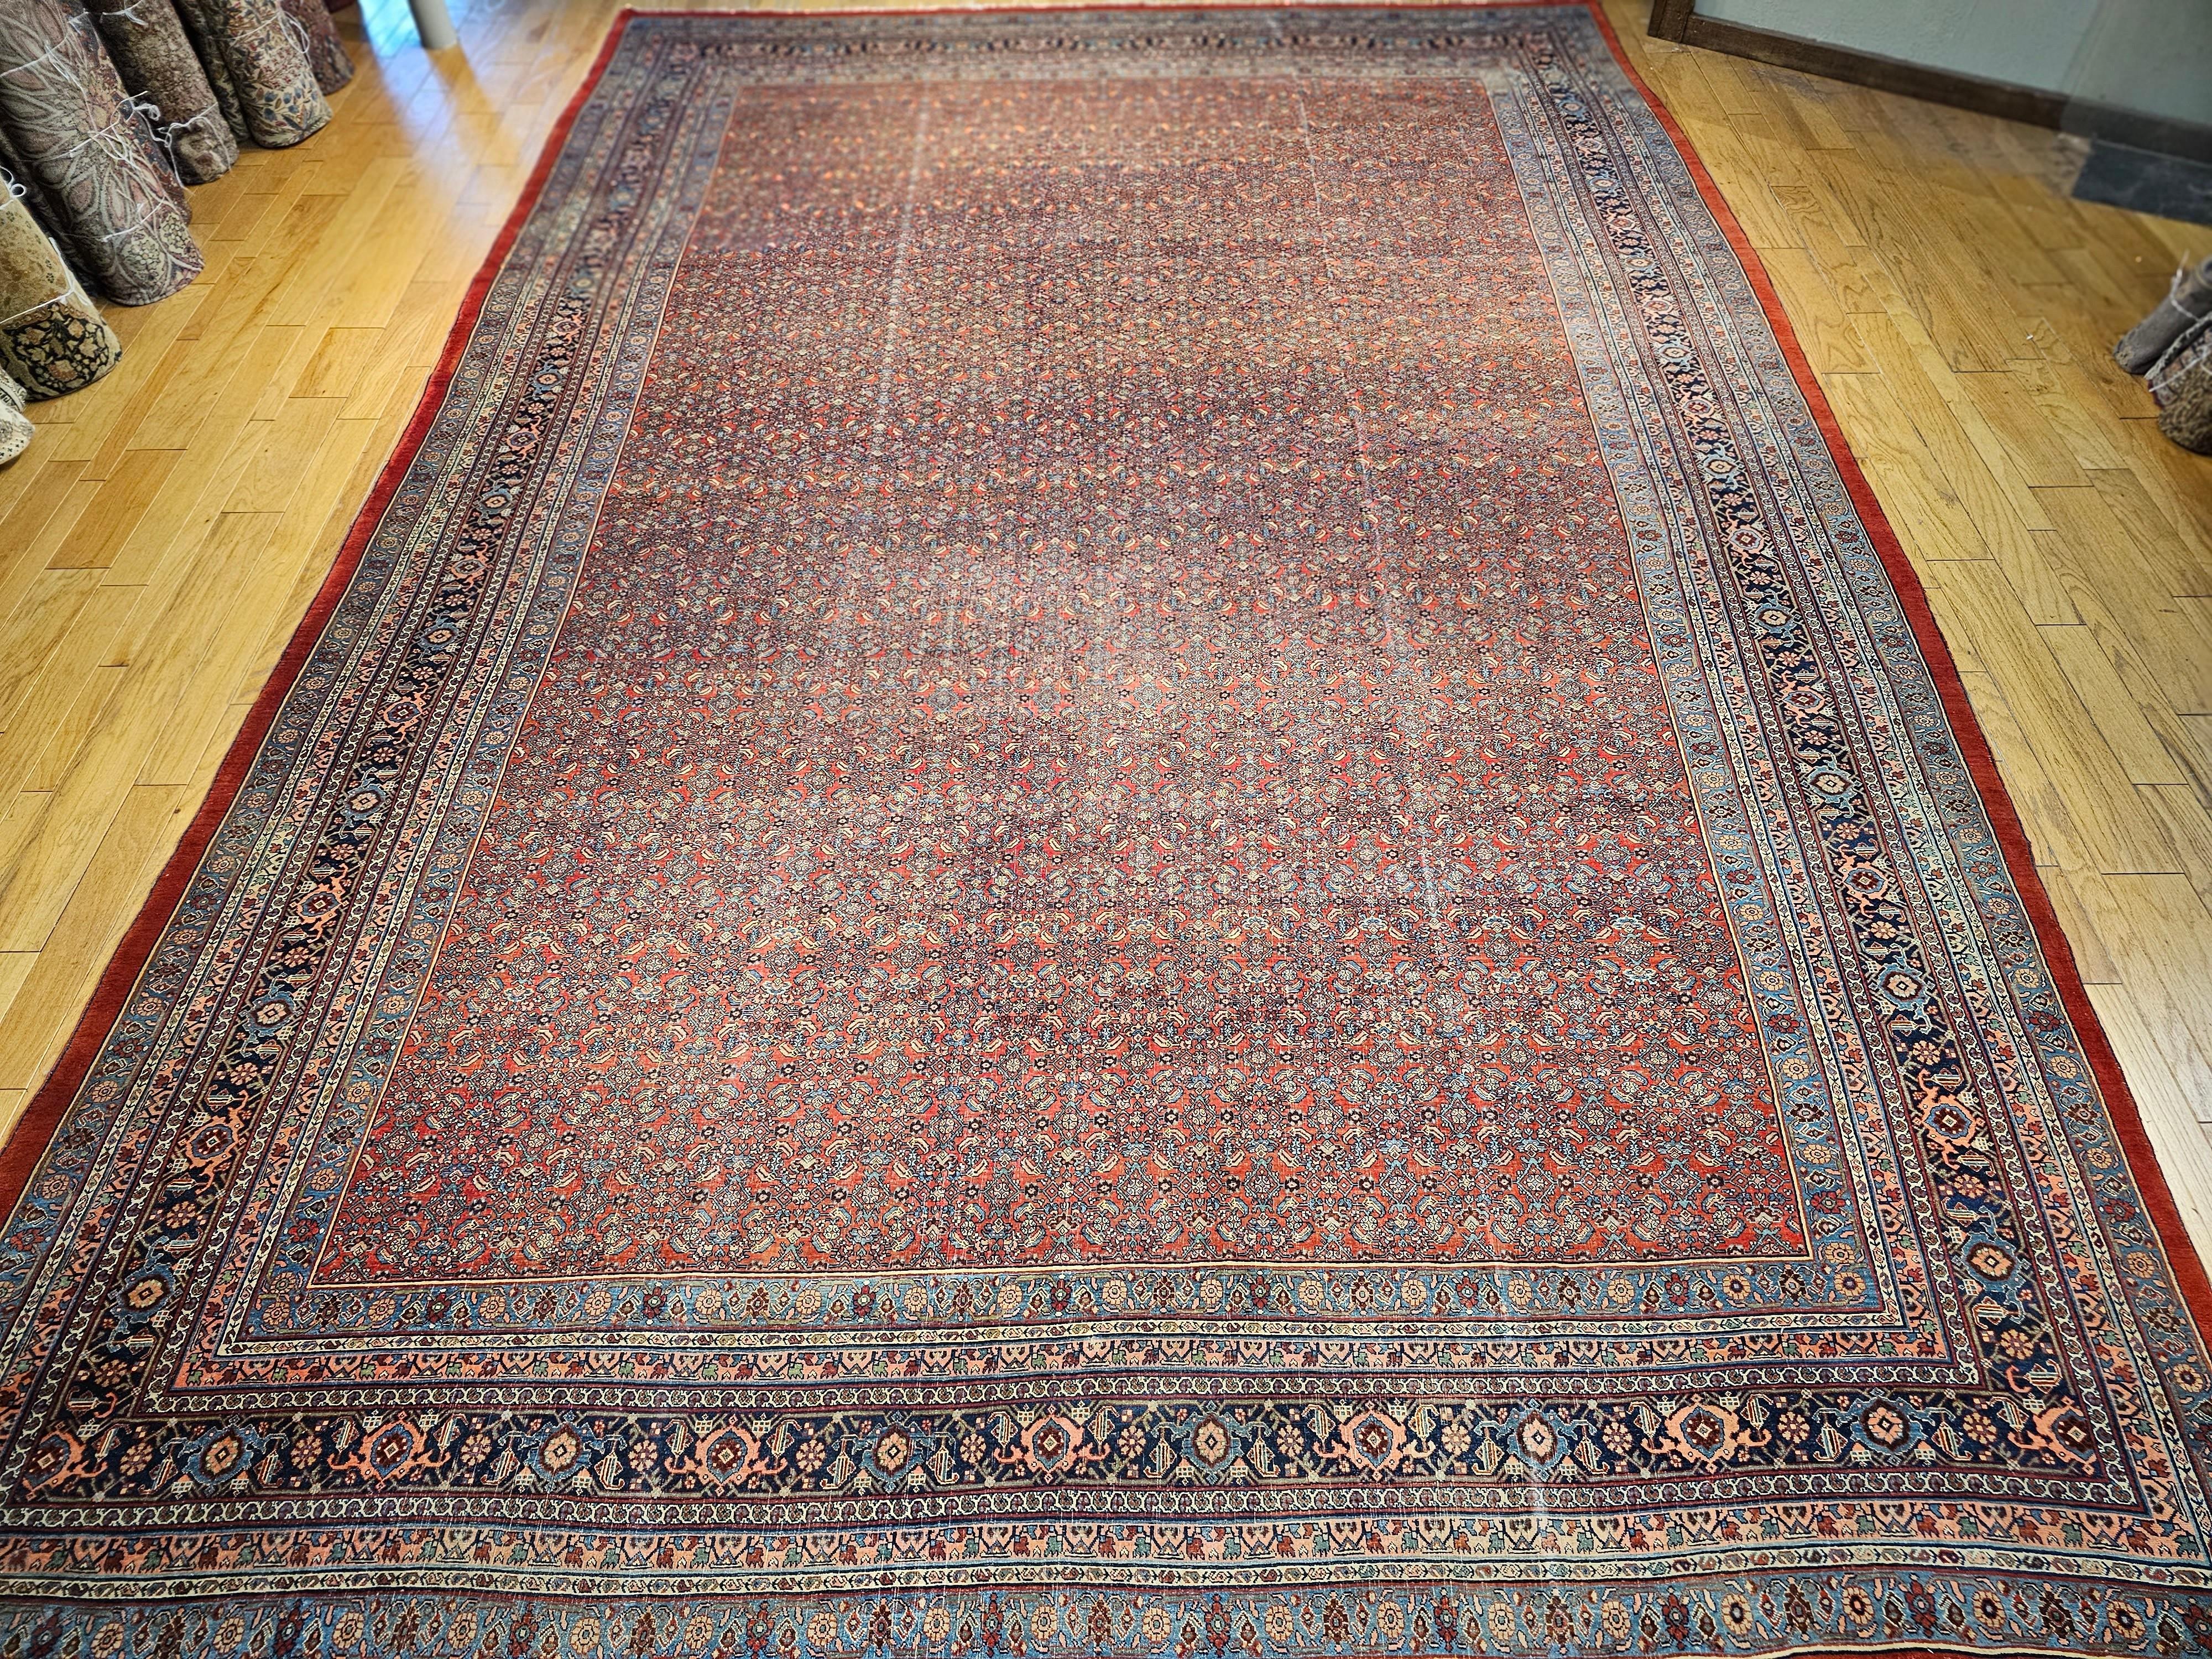 Vintage oversized (mansion or palace size) hand-knotted Persian Bidjar is a masterpiece of the early 20th-century in an all over Herati pattern. This Bidjar rug is an exceptional piece in every aspect of design and production. This rug has an